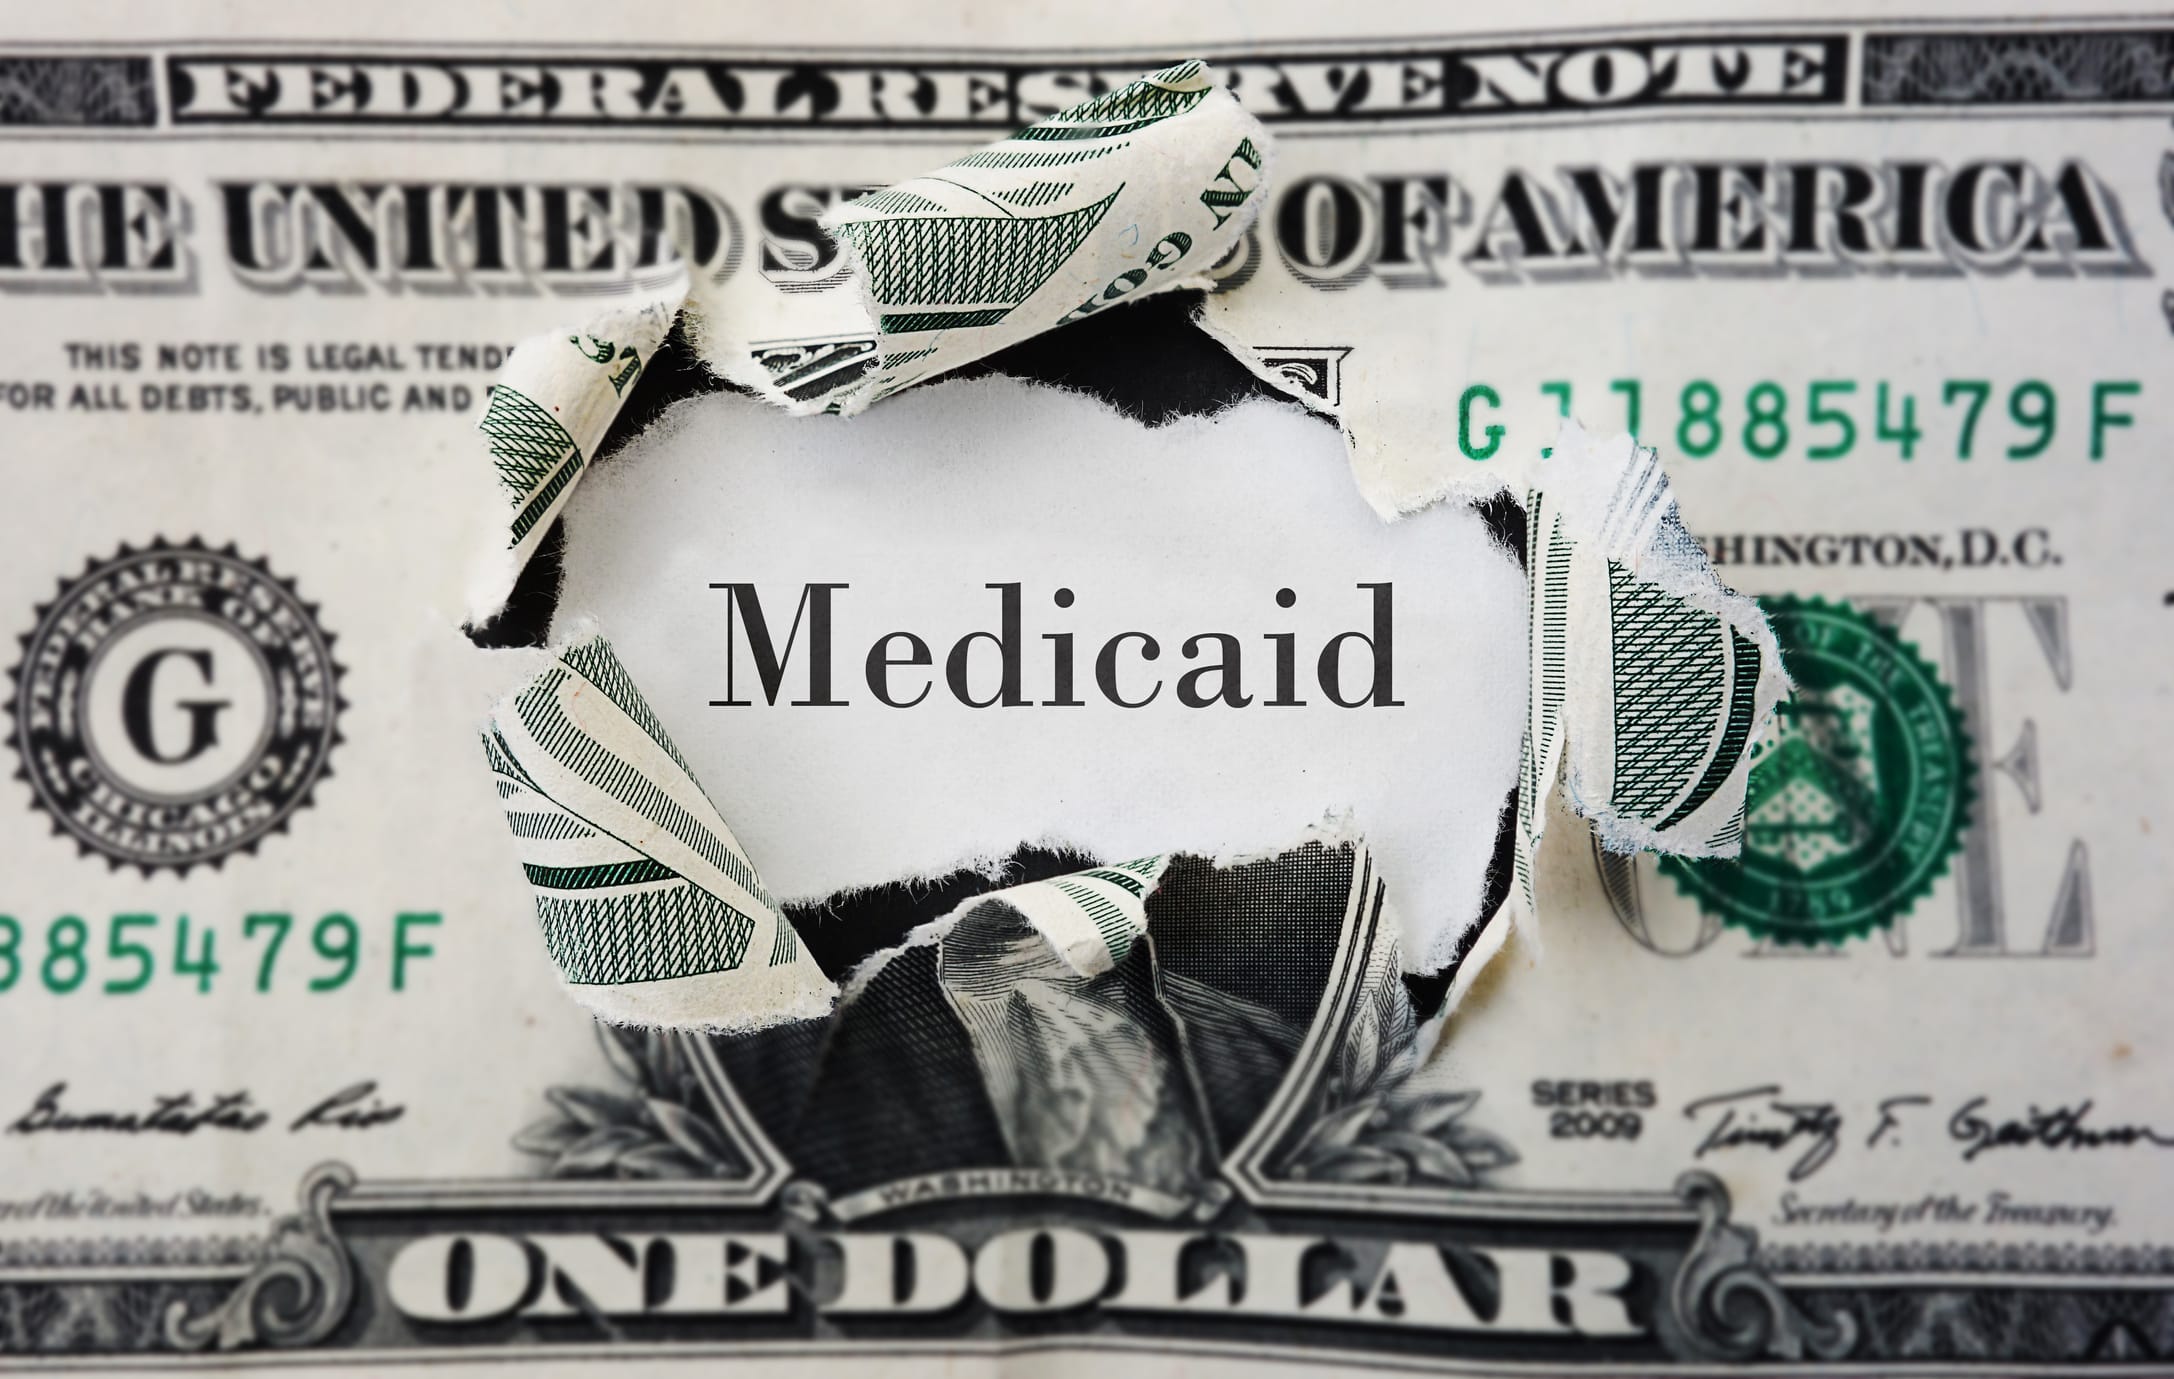 Can an Irrevocable Trust Protect Your Assets From Medicaid? - Werner Law Firm